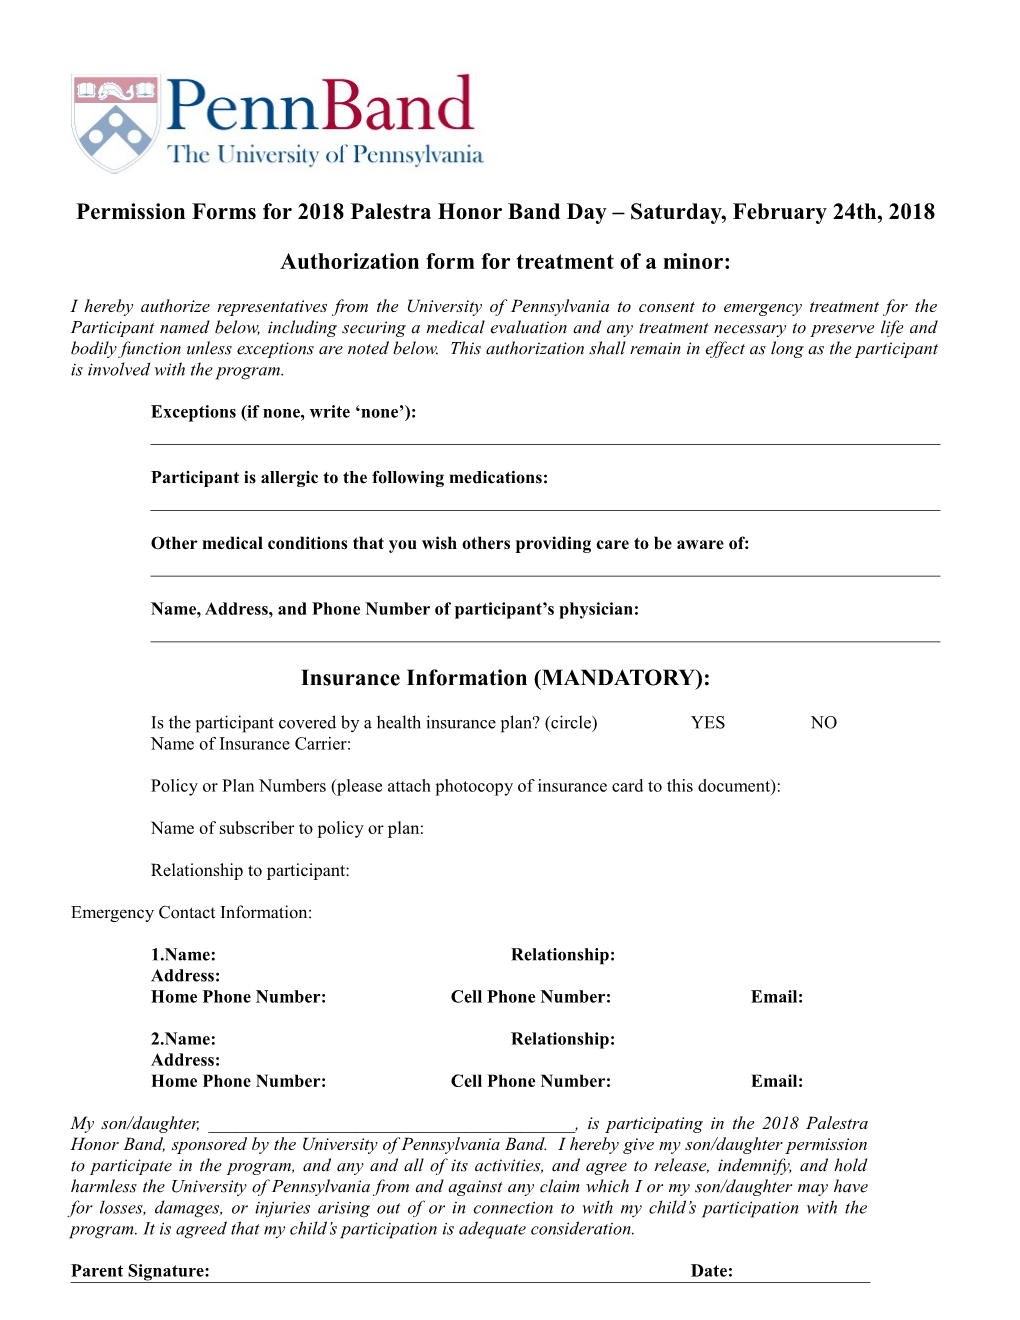 Authorization Form for Treatment of a Minor